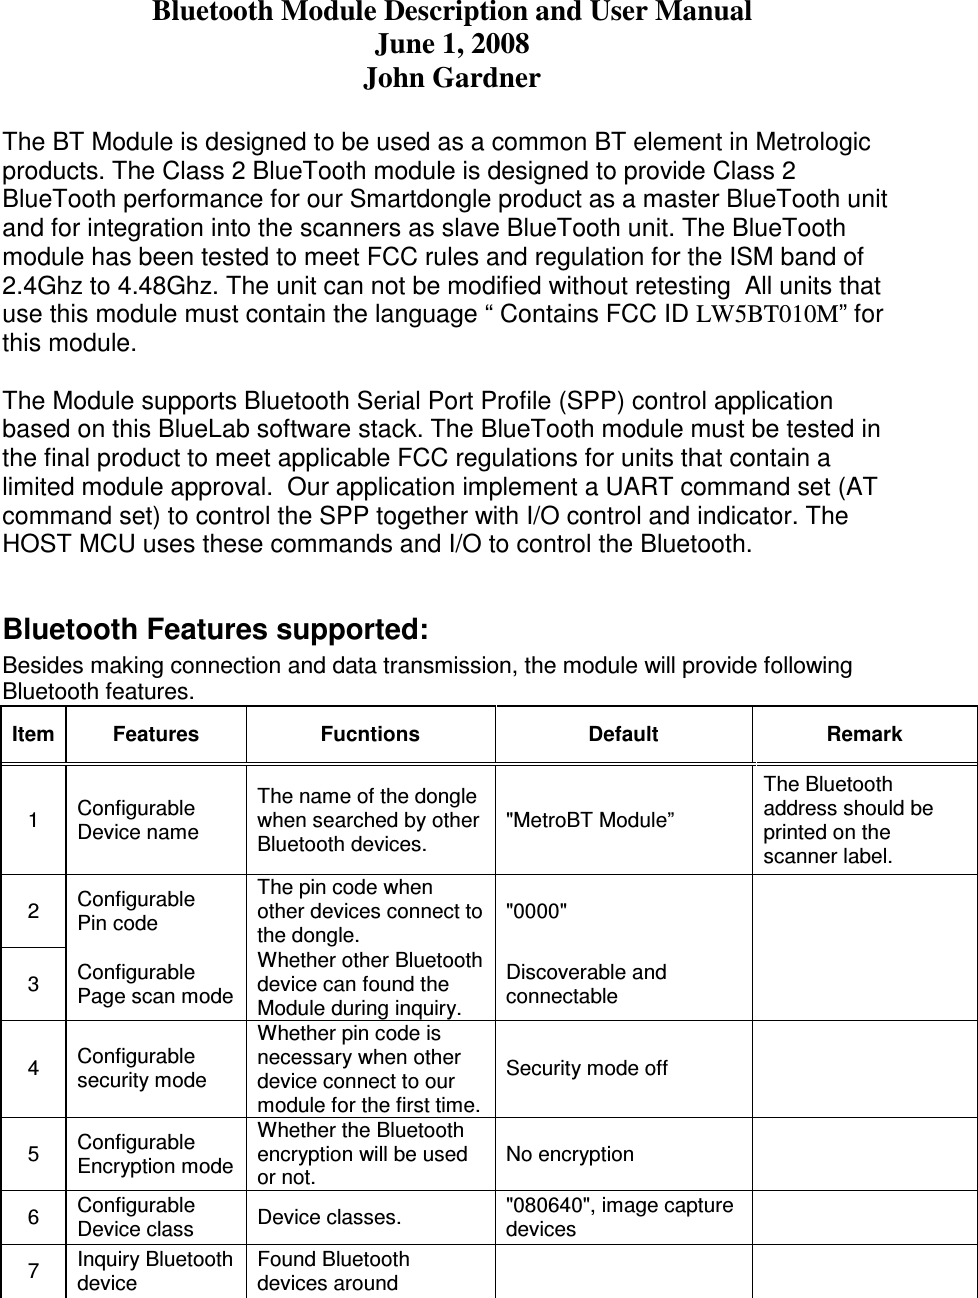 Bluetooth Module Description and User Manual June 1, 2008 John Gardner  The BT Module is designed to be used as a common BT element in Metrologic products. The Class 2 BlueTooth module is designed to provide Class 2 BlueTooth performance for our Smartdongle product as a master BlueTooth unit and for integration into the scanners as slave BlueTooth unit. The BlueTooth module has been tested to meet FCC rules and regulation for the ISM band of 2.4Ghz to 4.48Ghz. The unit can not be modified without retesting  All units that use this module must contain the language “ Contains FCC ID LW5BT010M” for this module.   The Module supports Bluetooth Serial Port Profile (SPP) control application based on this BlueLab software stack. The BlueTooth module must be tested in the final product to meet applicable FCC regulations for units that contain a limited module approval.  Our application implement a UART command set (AT command set) to control the SPP together with I/O control and indicator. The HOST MCU uses these commands and I/O to control the Bluetooth.  Bluetooth Features supported: Besides making connection and data transmission, the module will provide following Bluetooth features. Item Features  Fucntions  Default   Remark 1  Configurable Device name The name of the dongle when searched by other Bluetooth devices. &quot;MetroBT Module” The Bluetooth address should be printed on the scanner label. 2  Configurable Pin code The pin code when other devices connect to the dongle. &quot;0000&quot;    3  Configurable Page scan mode Whether other Bluetooth device can found the Module during inquiry. Discoverable and connectable    4  Configurable security mode Whether pin code is necessary when other device connect to our module for the first time. Security mode off   5  Configurable Encryption mode Whether the Bluetooth encryption will be used or not. No encryption    6  Configurable Device class  Device classes.  &quot;080640&quot;, image capture devices    7  Inquiry Bluetooth device Found Bluetooth devices around     